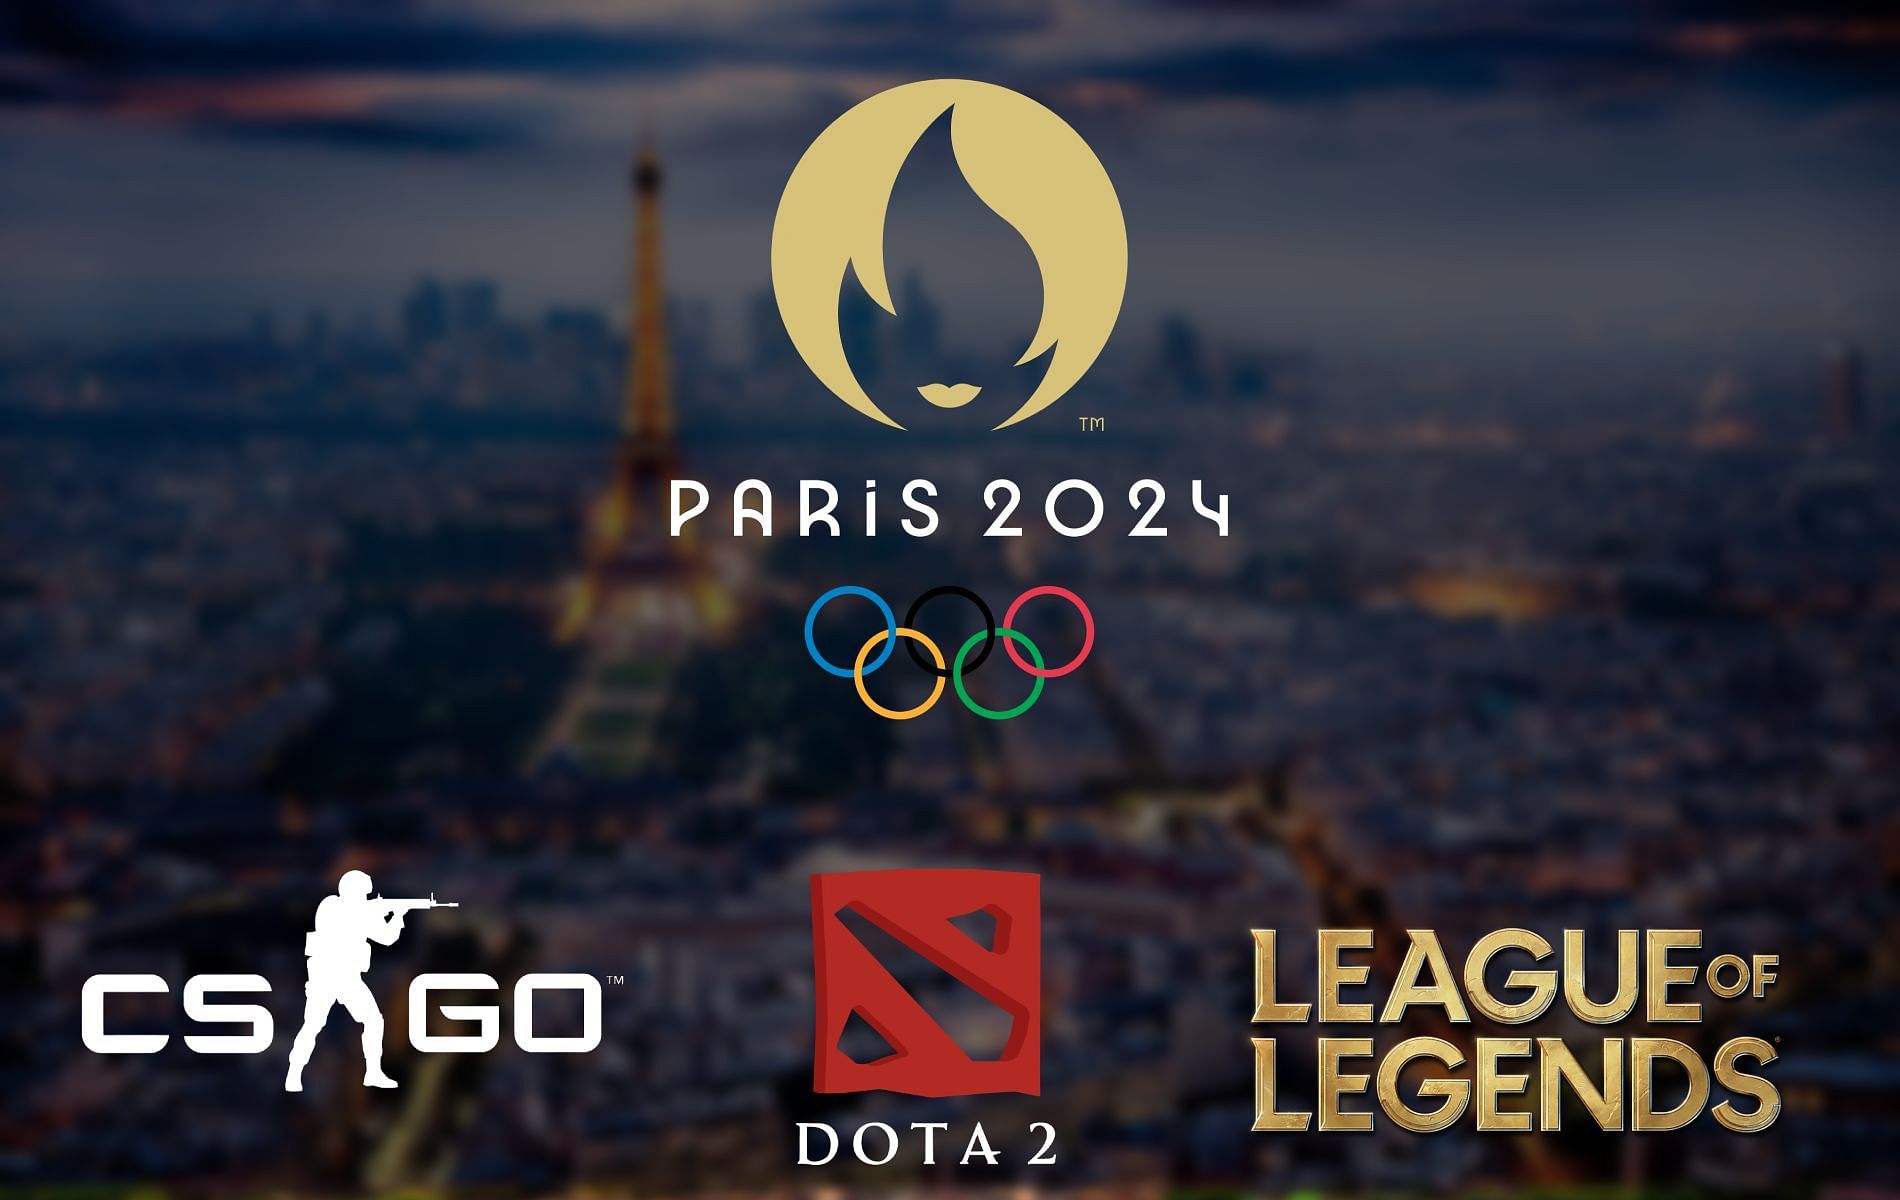 CS:GO, Dota 2 and LoL Worlds might be included in 2024 Paris Olympics as Esports titles